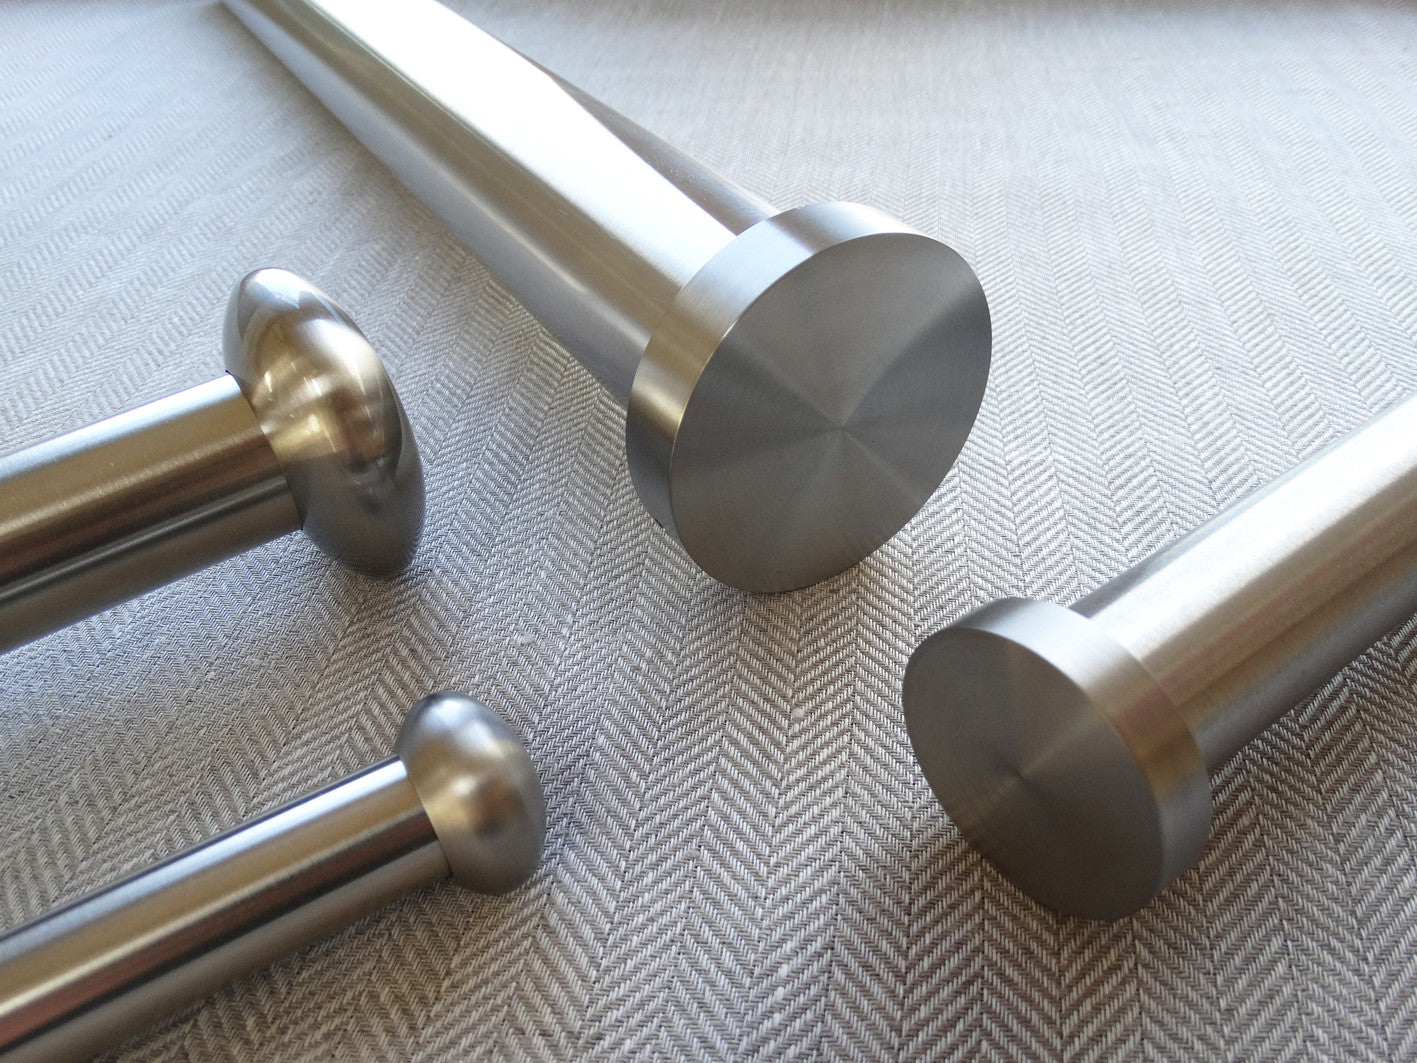 Stainless steel curtain pole collections with plain steel elliptical finials